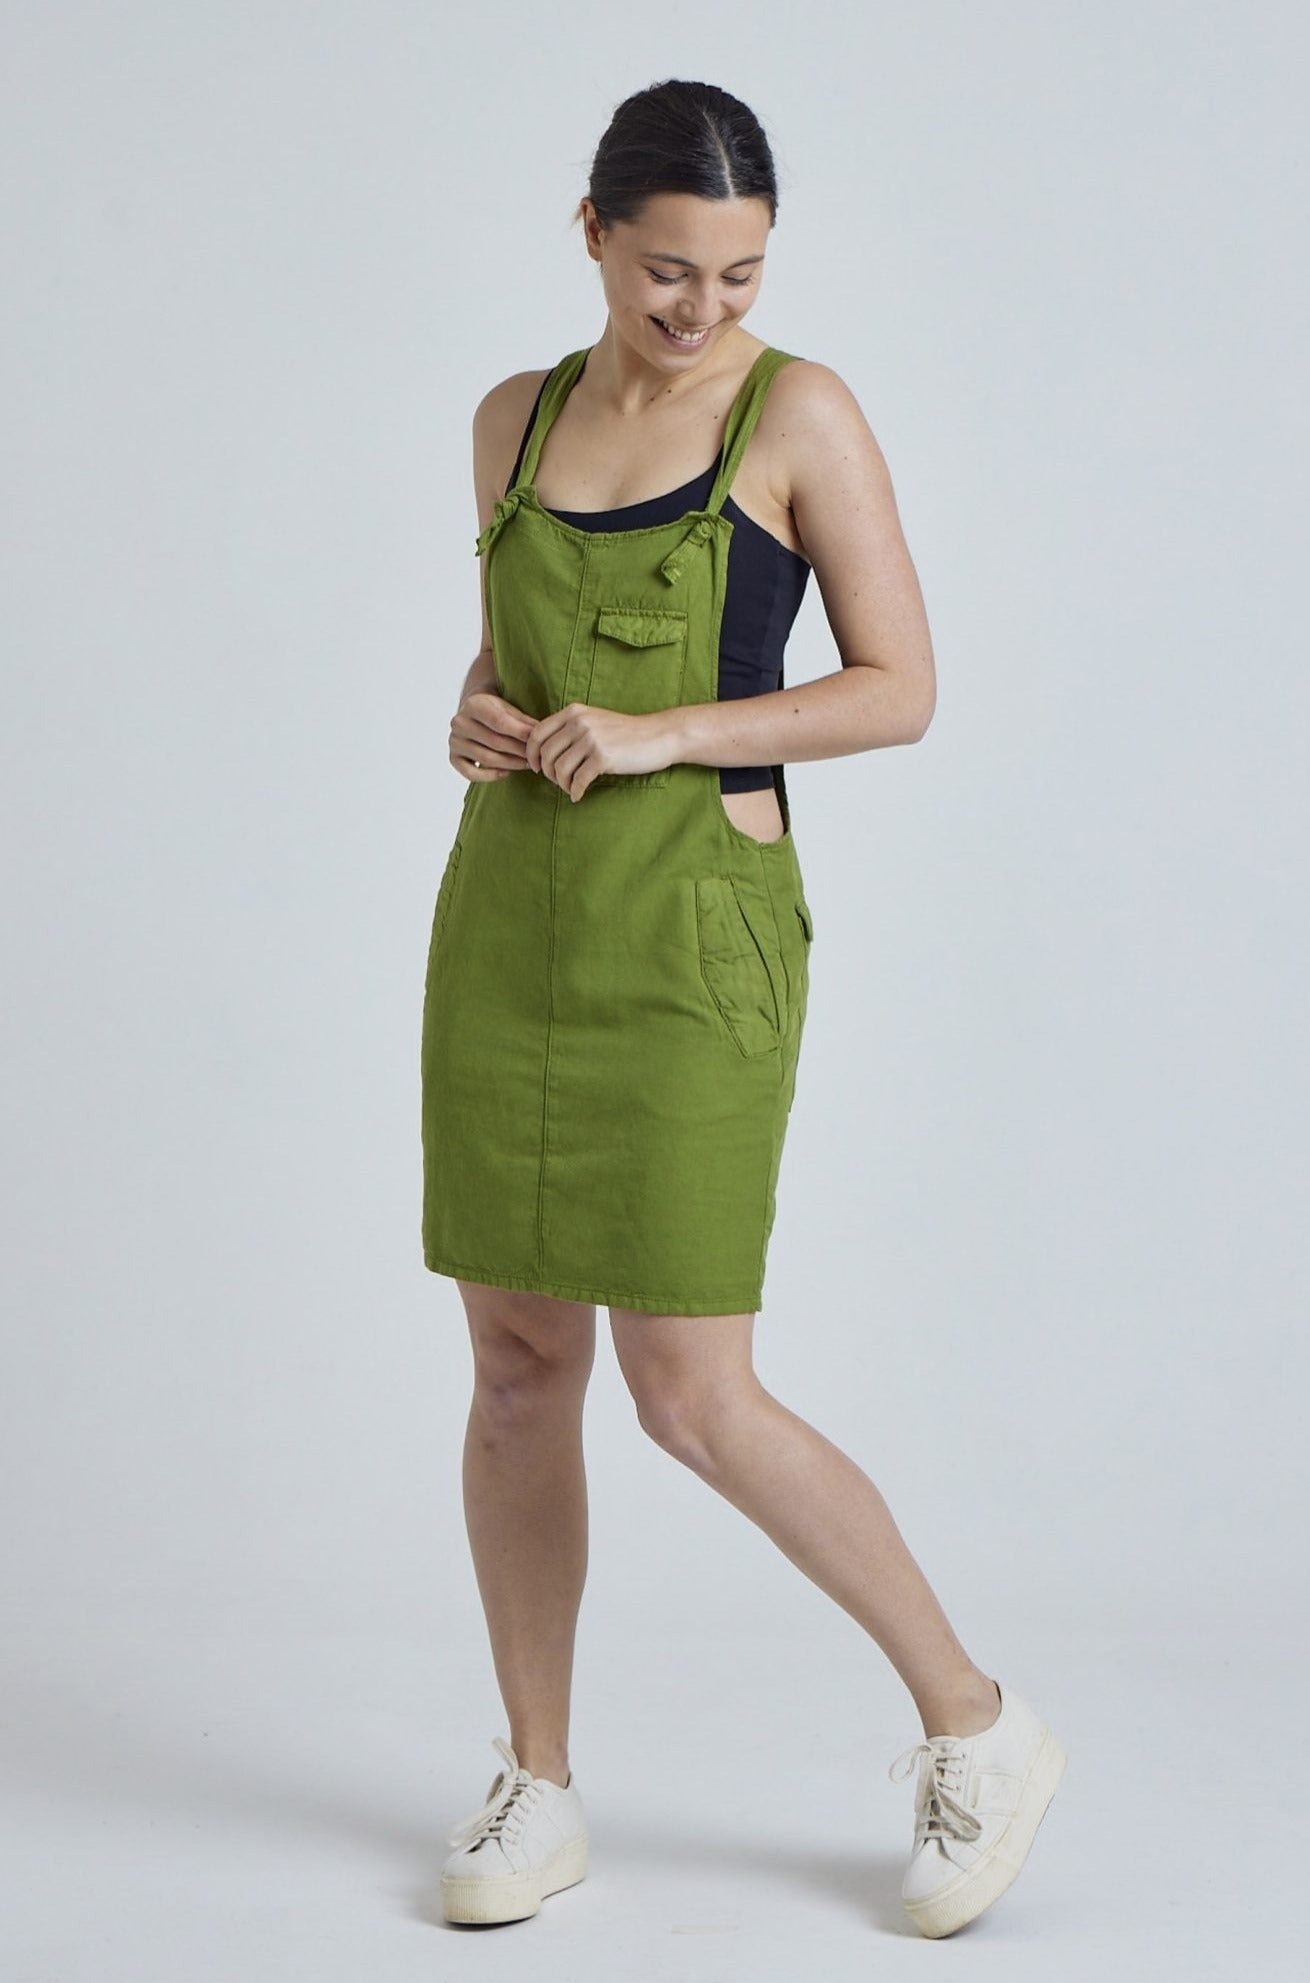 Spring Green Peggy Pocket Dungaree Dress - GOTS Certified Organic Cotton and Linen